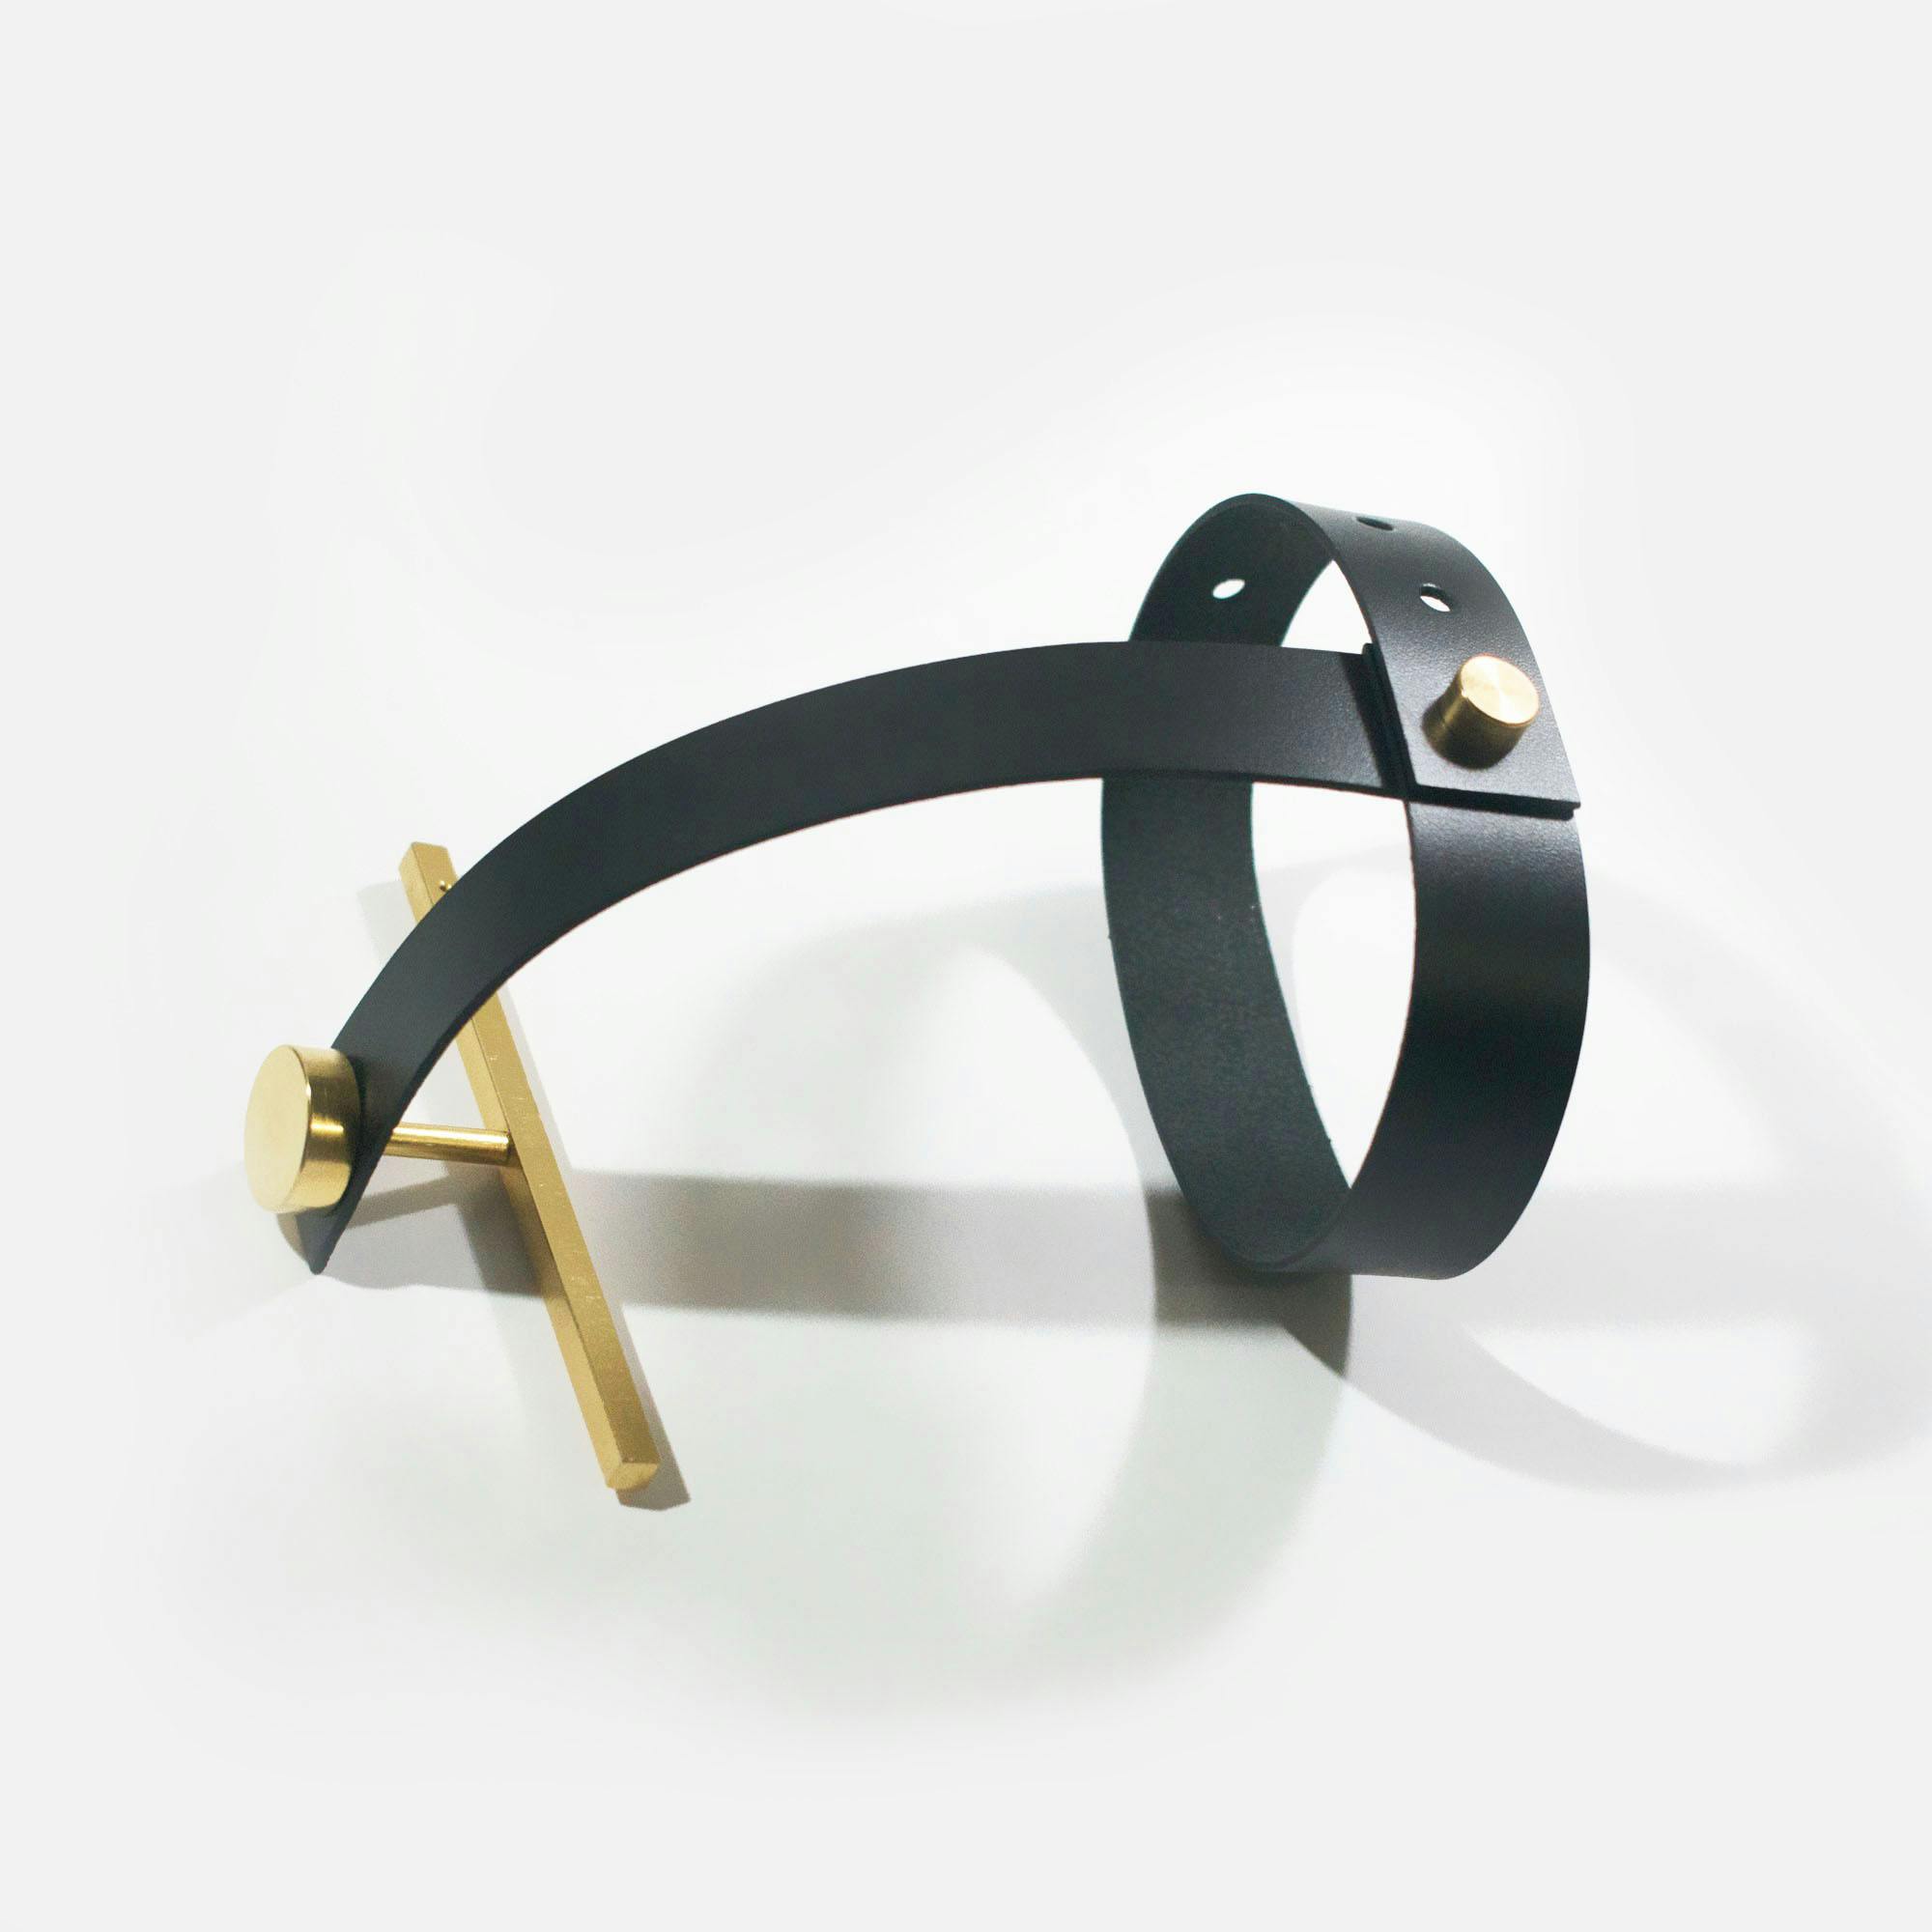 A Bar Circle Machination - Hand Accessory, a product by NO NA MÉ